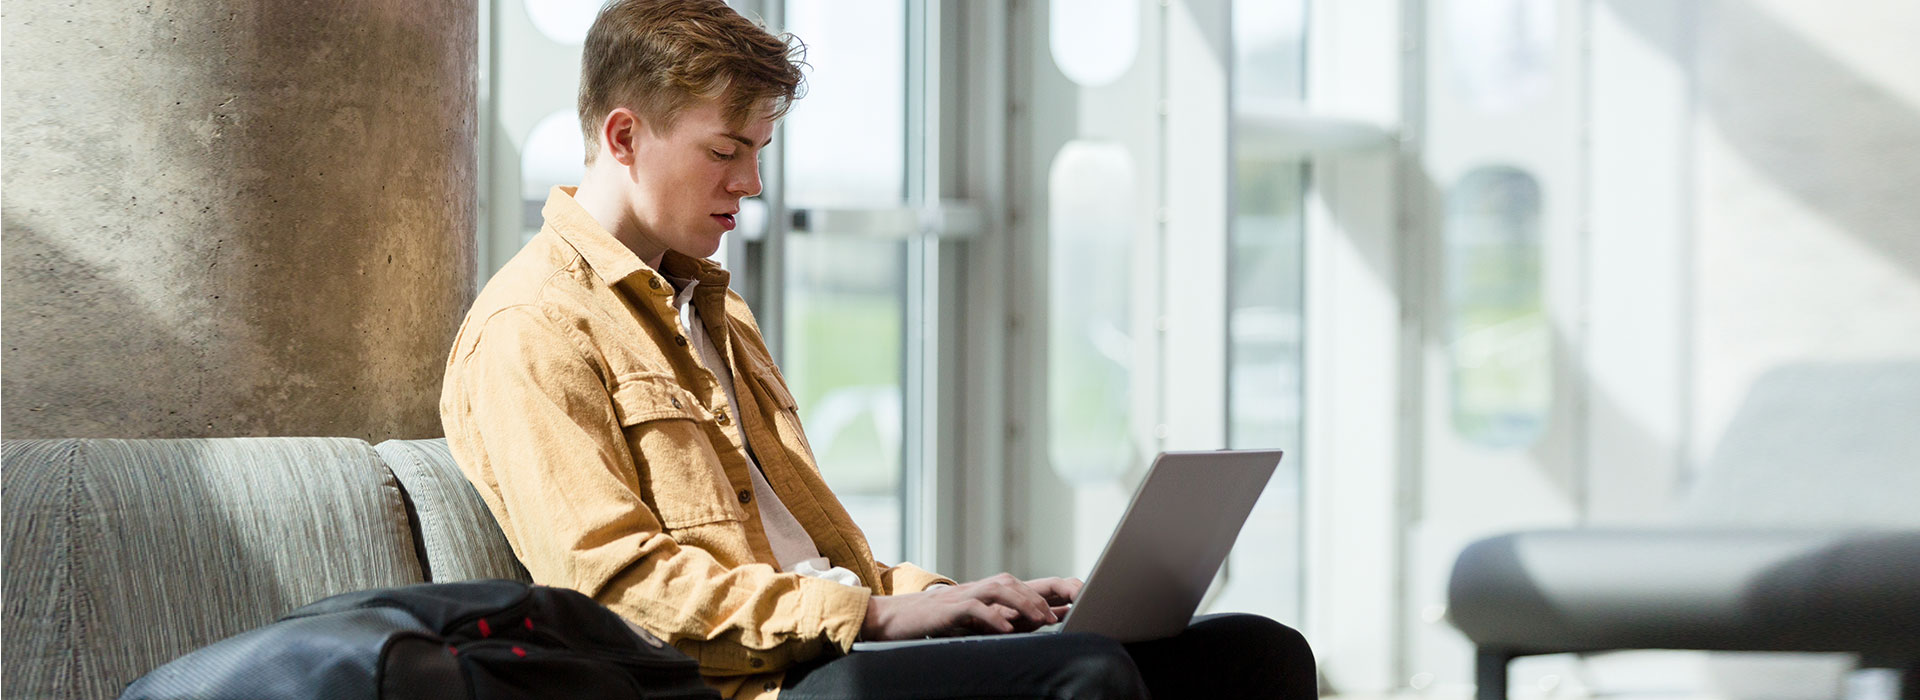 younger male Student at a laptop computer holding book